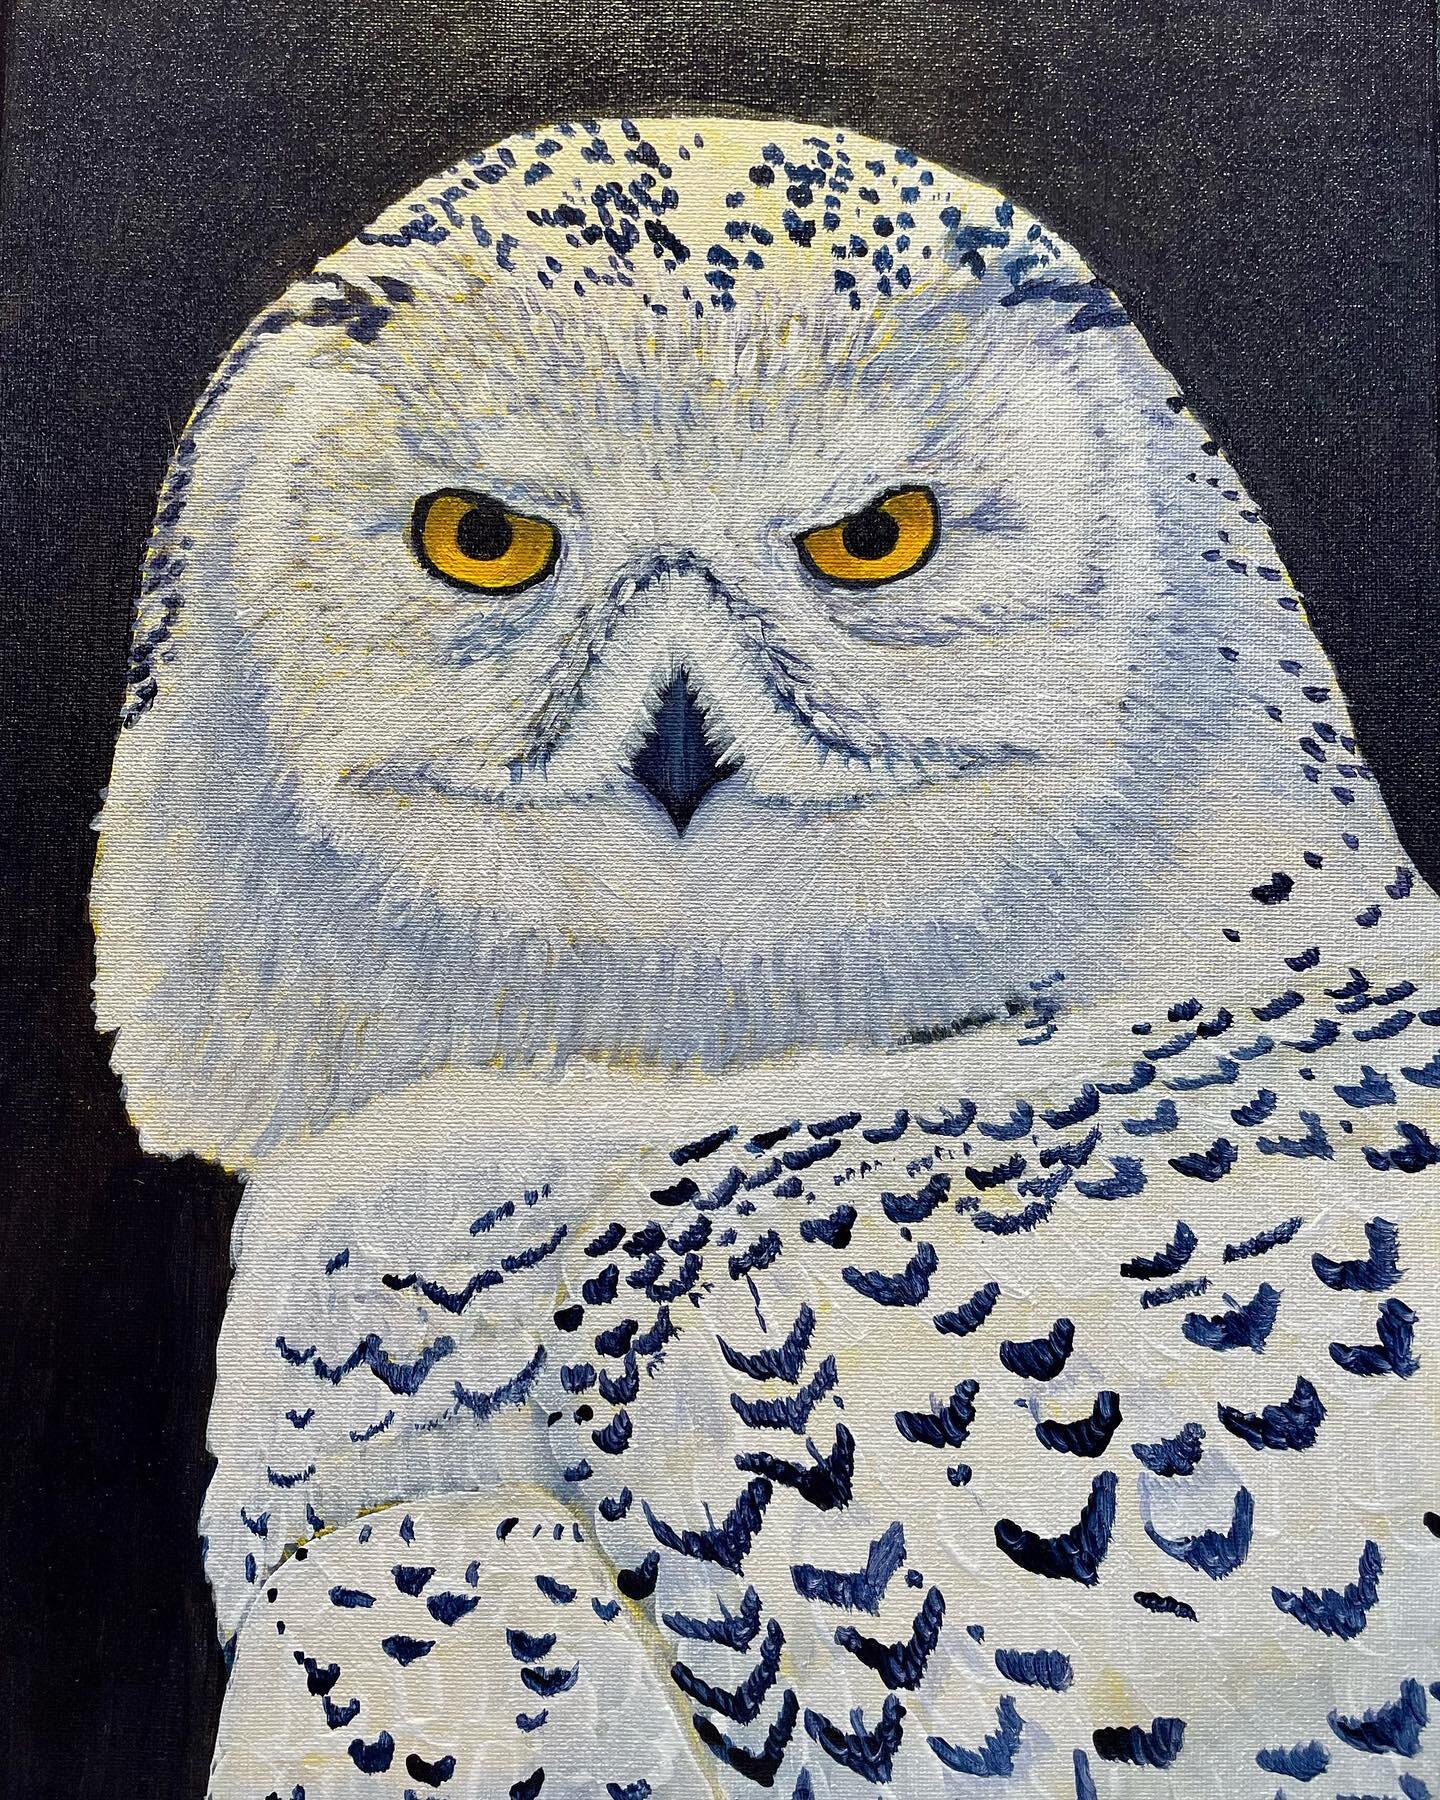 Here&rsquo;s my finished acrylic painting.  Snowy Owl, 12&rdquo; x 16&rdquo;. Sign up for my newsletter www.sloangerardstudio.com #birdsofprey #surrealism #acrylicpainting #snowyowl  #birdsofinstagram